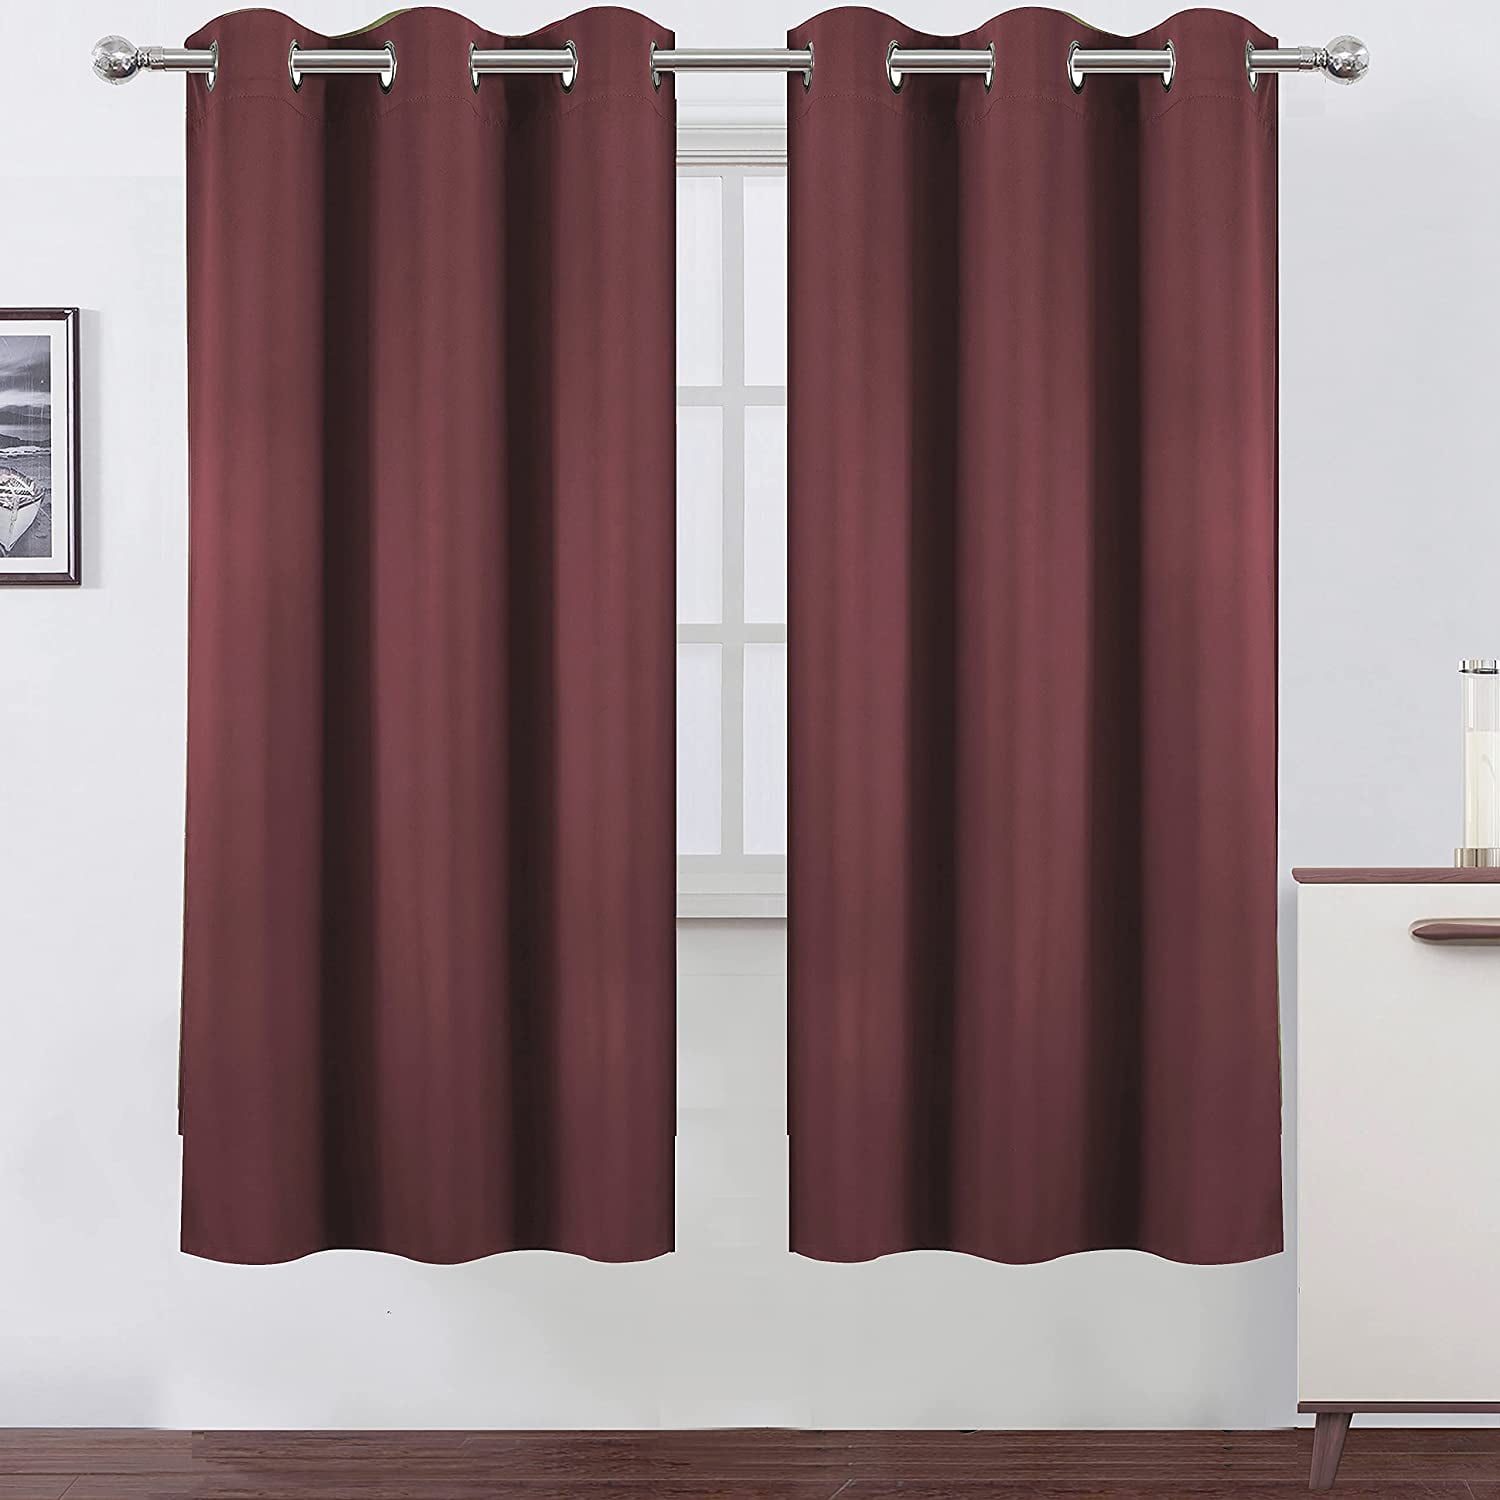 Indoor Divider Blackout Room Curtain Heavy Duty Bedroom Kitchen Burgundy Red New 